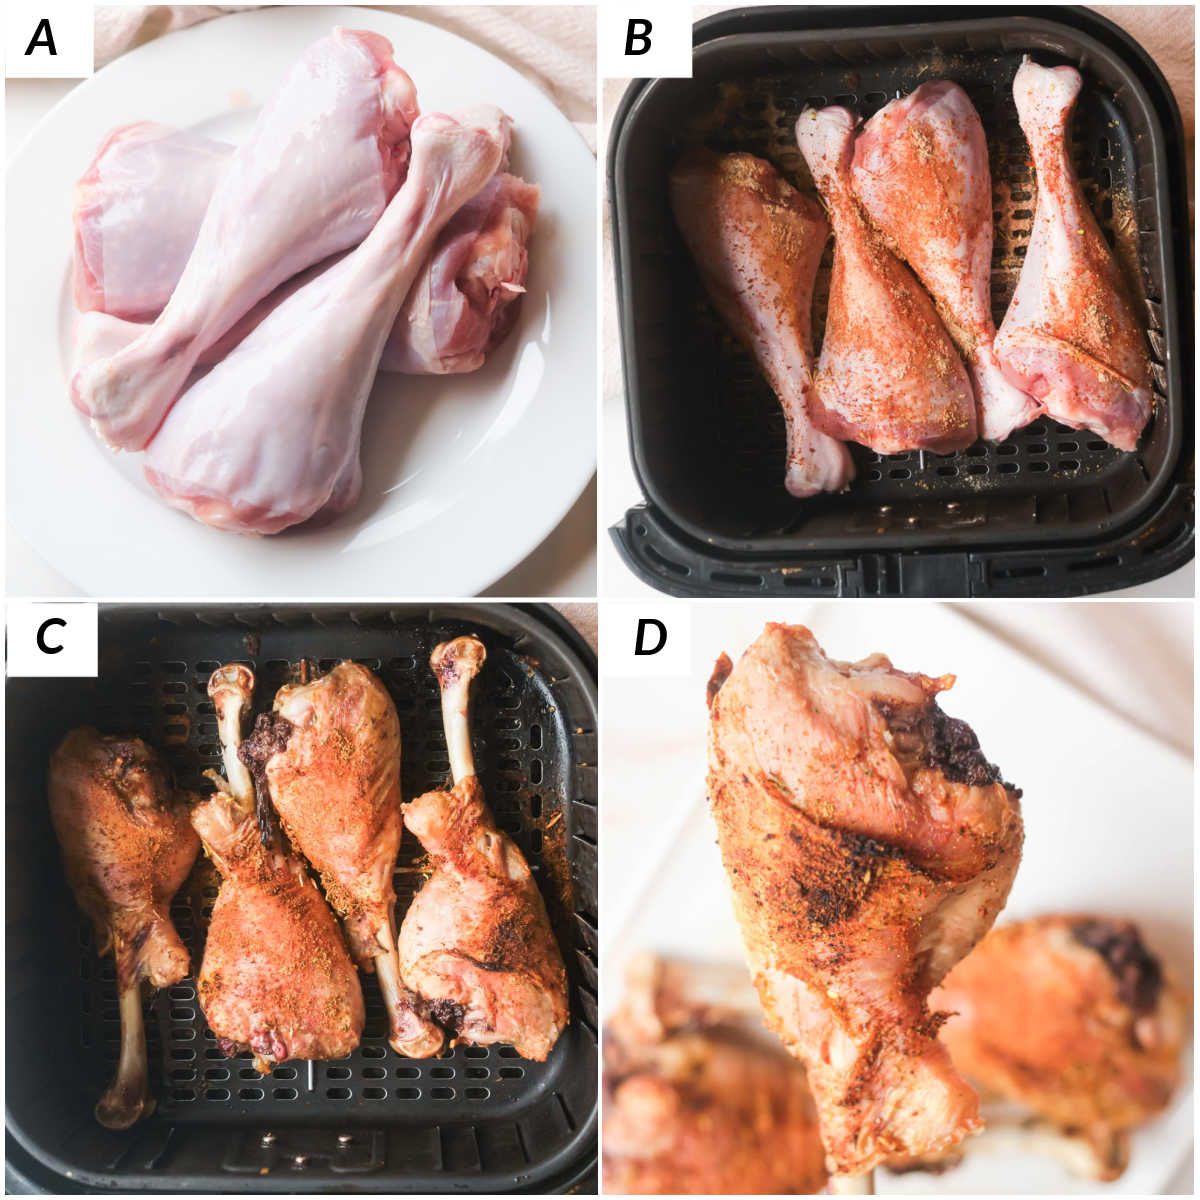 image collage showing the steps for making air fryer turkey legs